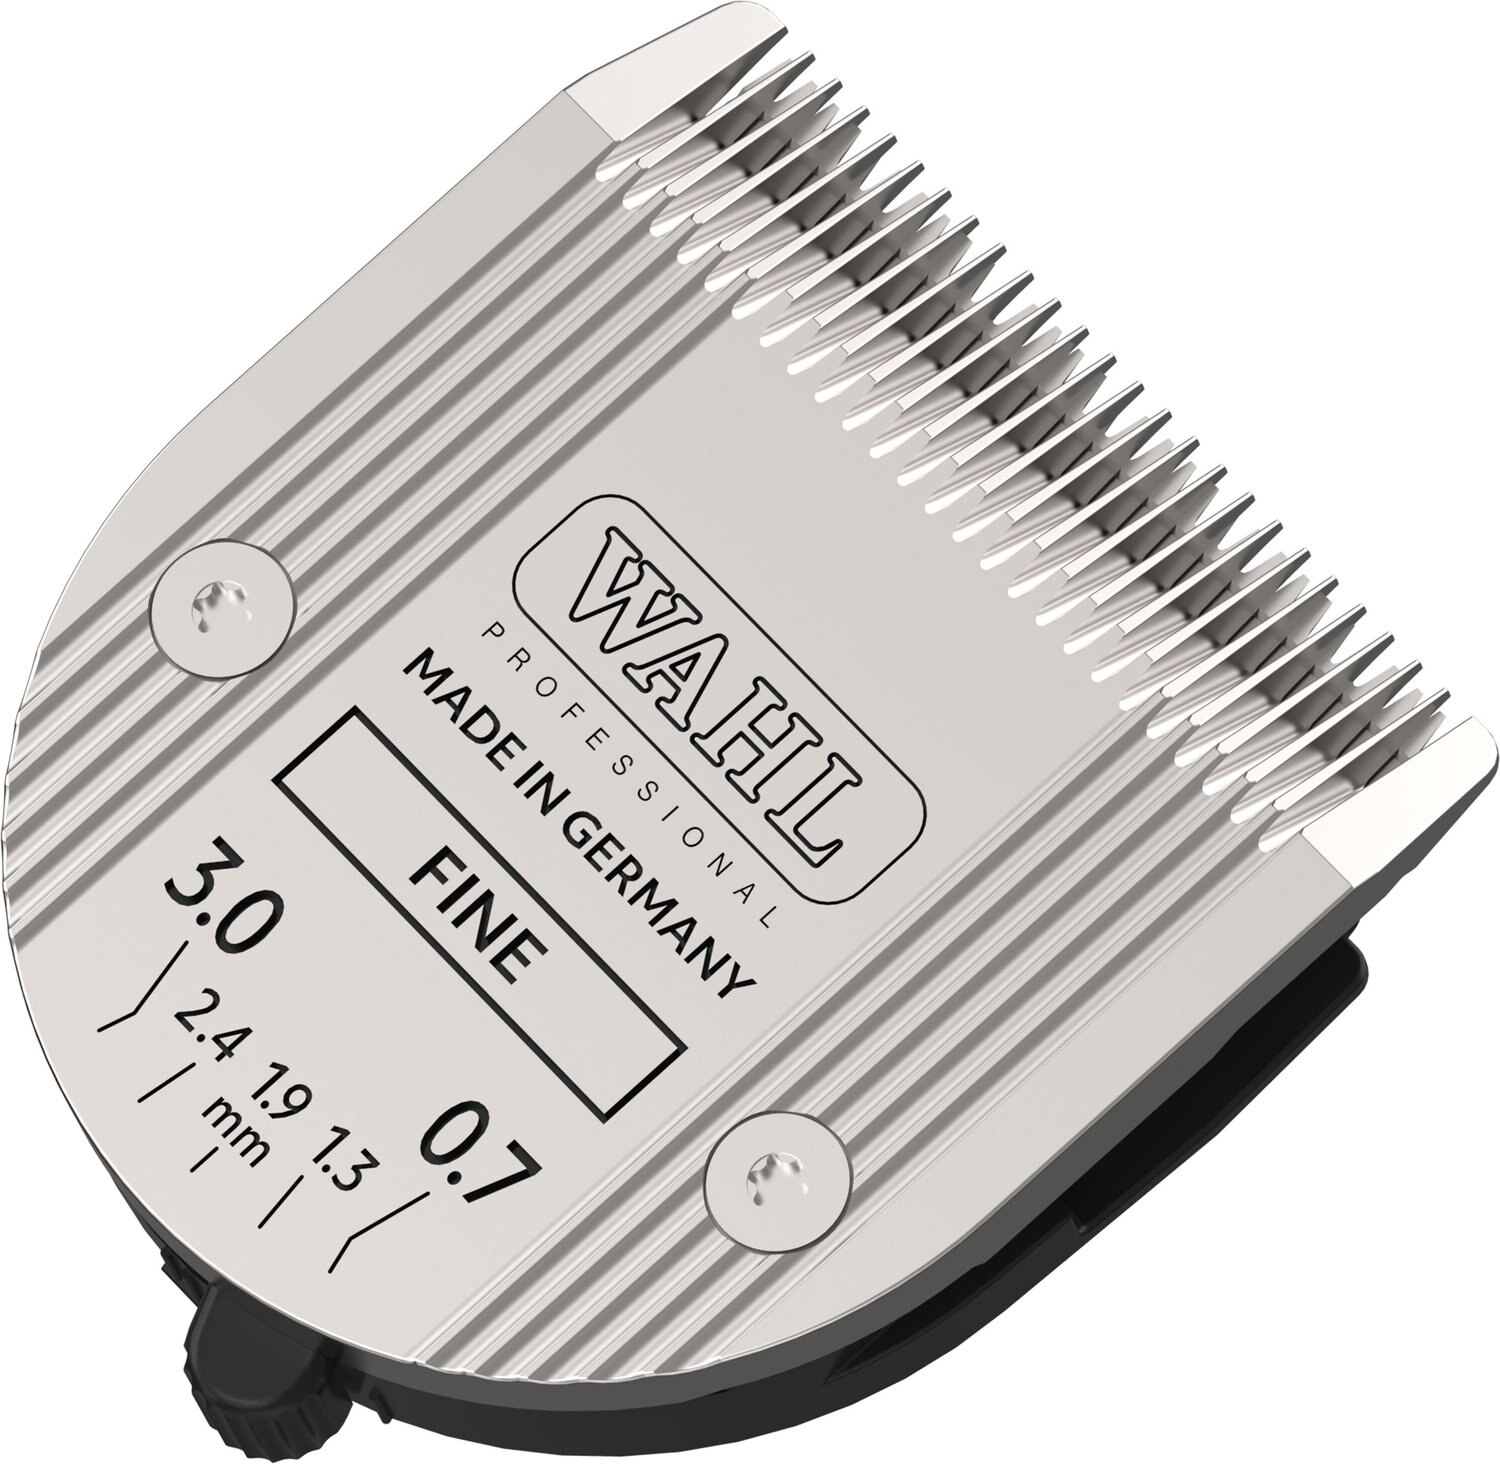 wahl clipper guard sizes